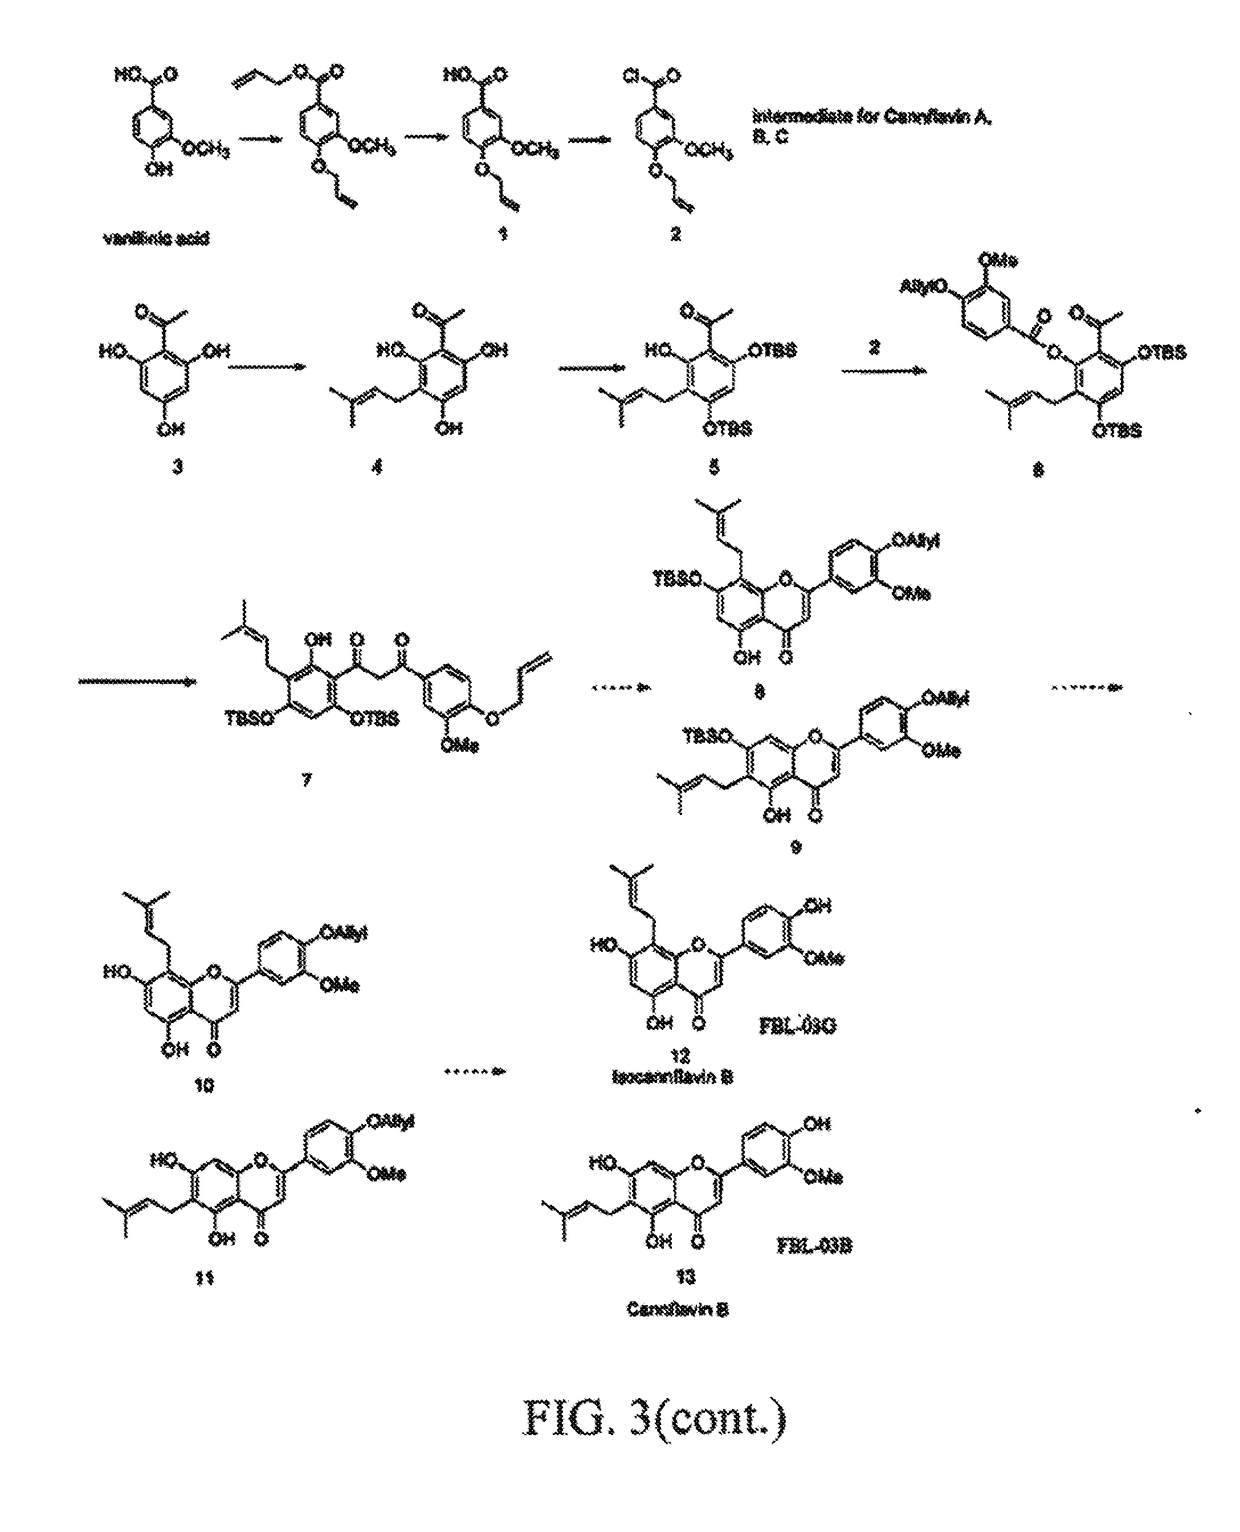 Therapeutic agents containing cannabis flavonoid derivatives targeting kinases, sirtuins and oncogenic agents for the treatment of cancers